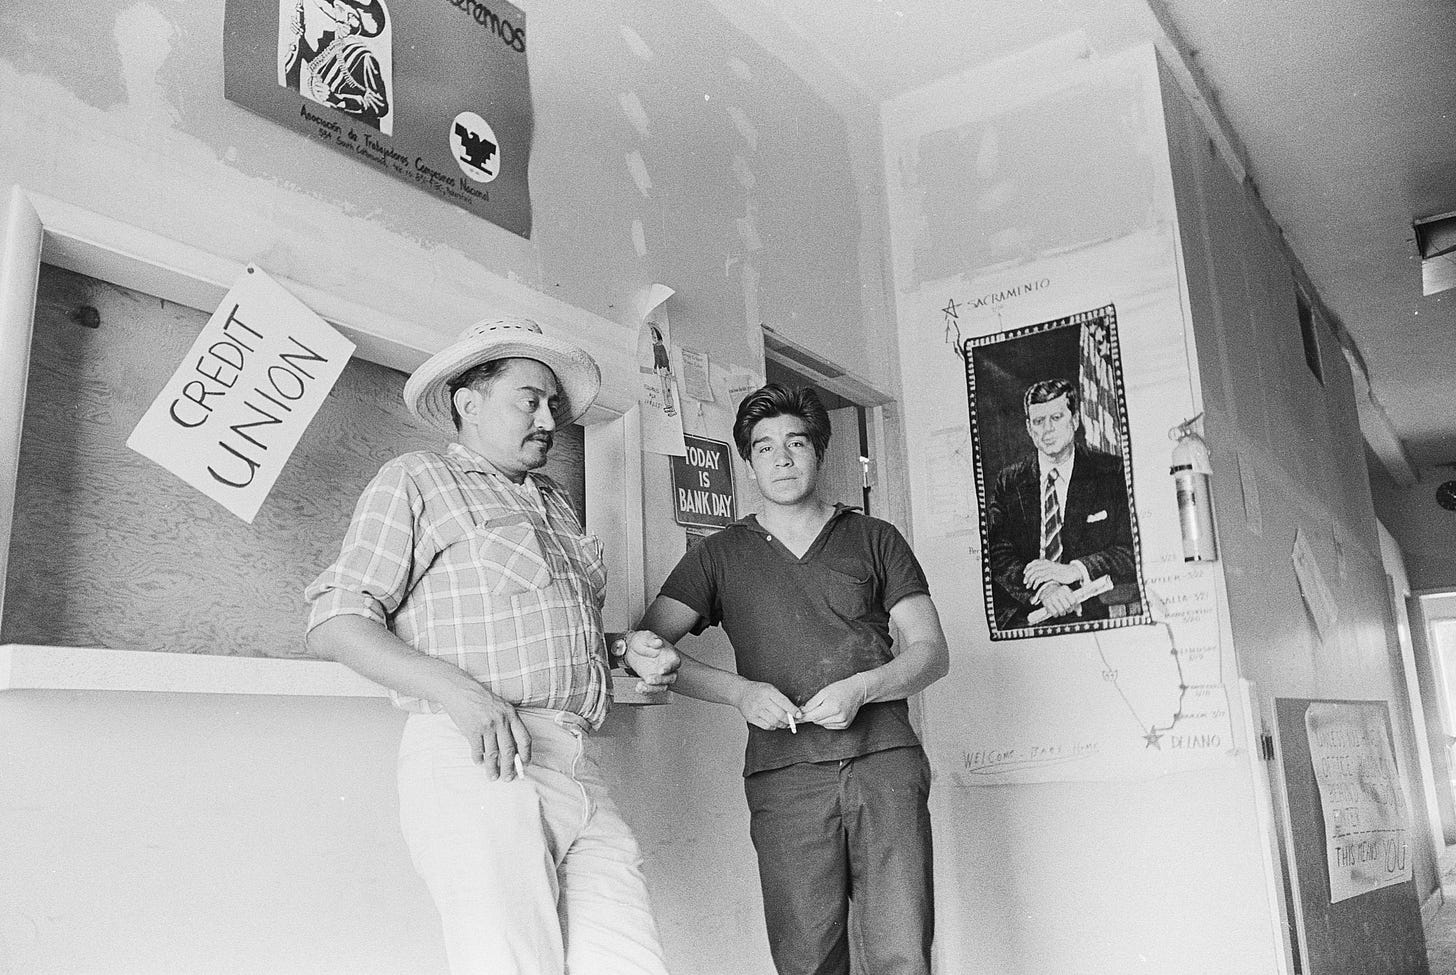 Tony Orendain (left) and a farm worker stand in front of the National Farm Workers Association credit union at Forty Acres in Delano, California. Photo by John Kouns © Tom and Ethel Bradley Center